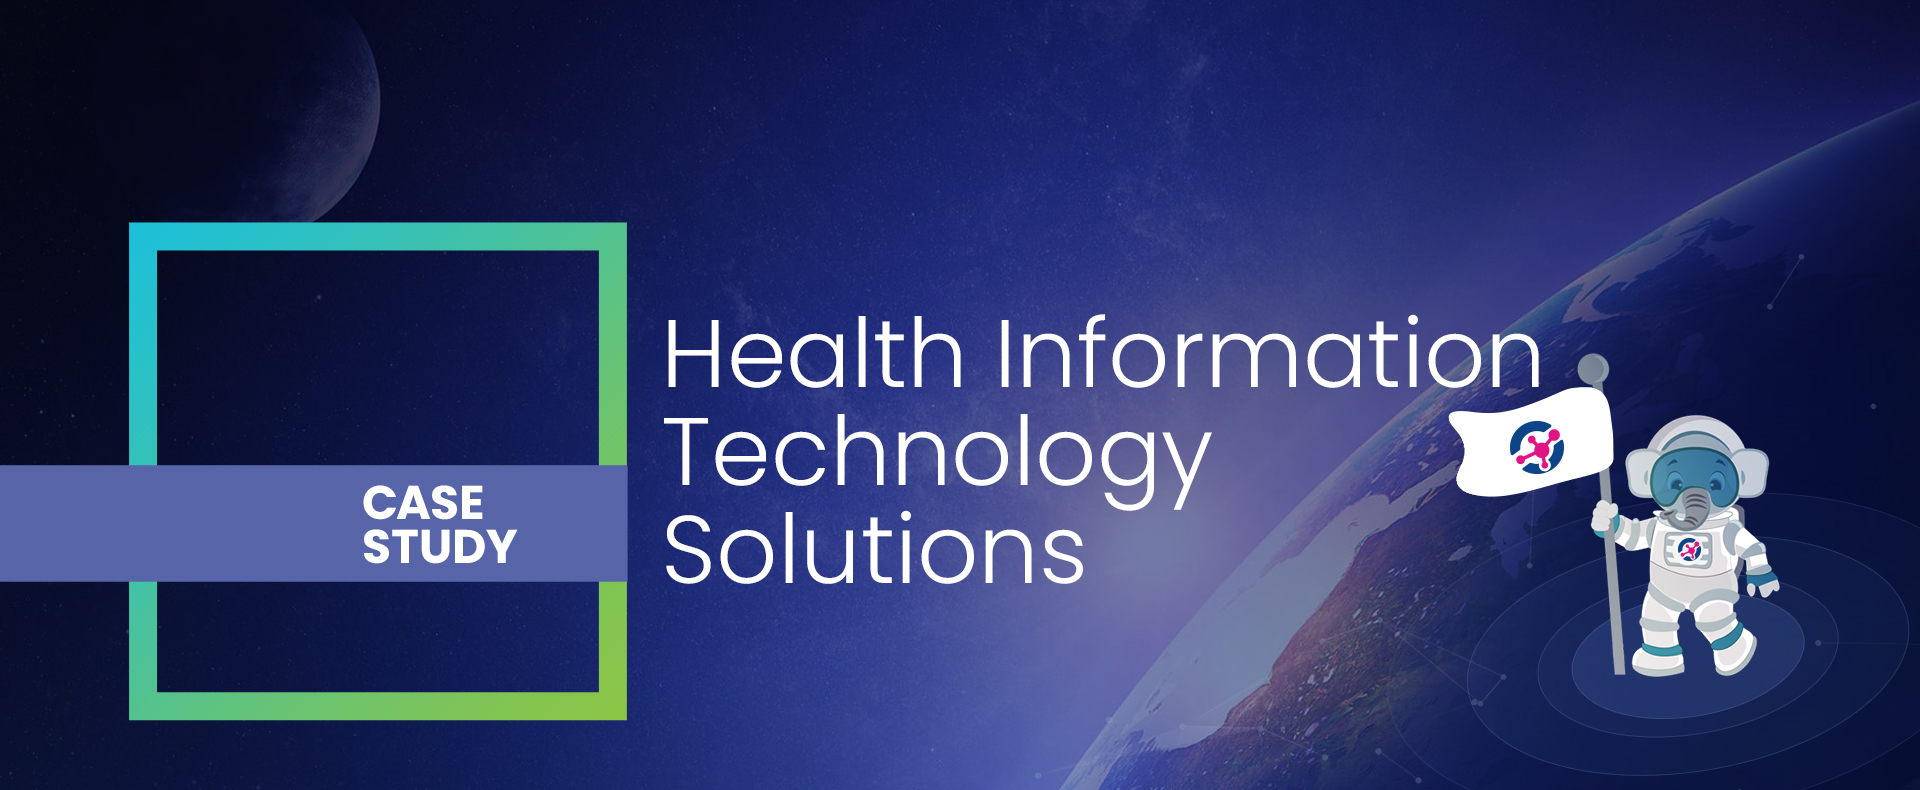 Health Information Technology Solution-1